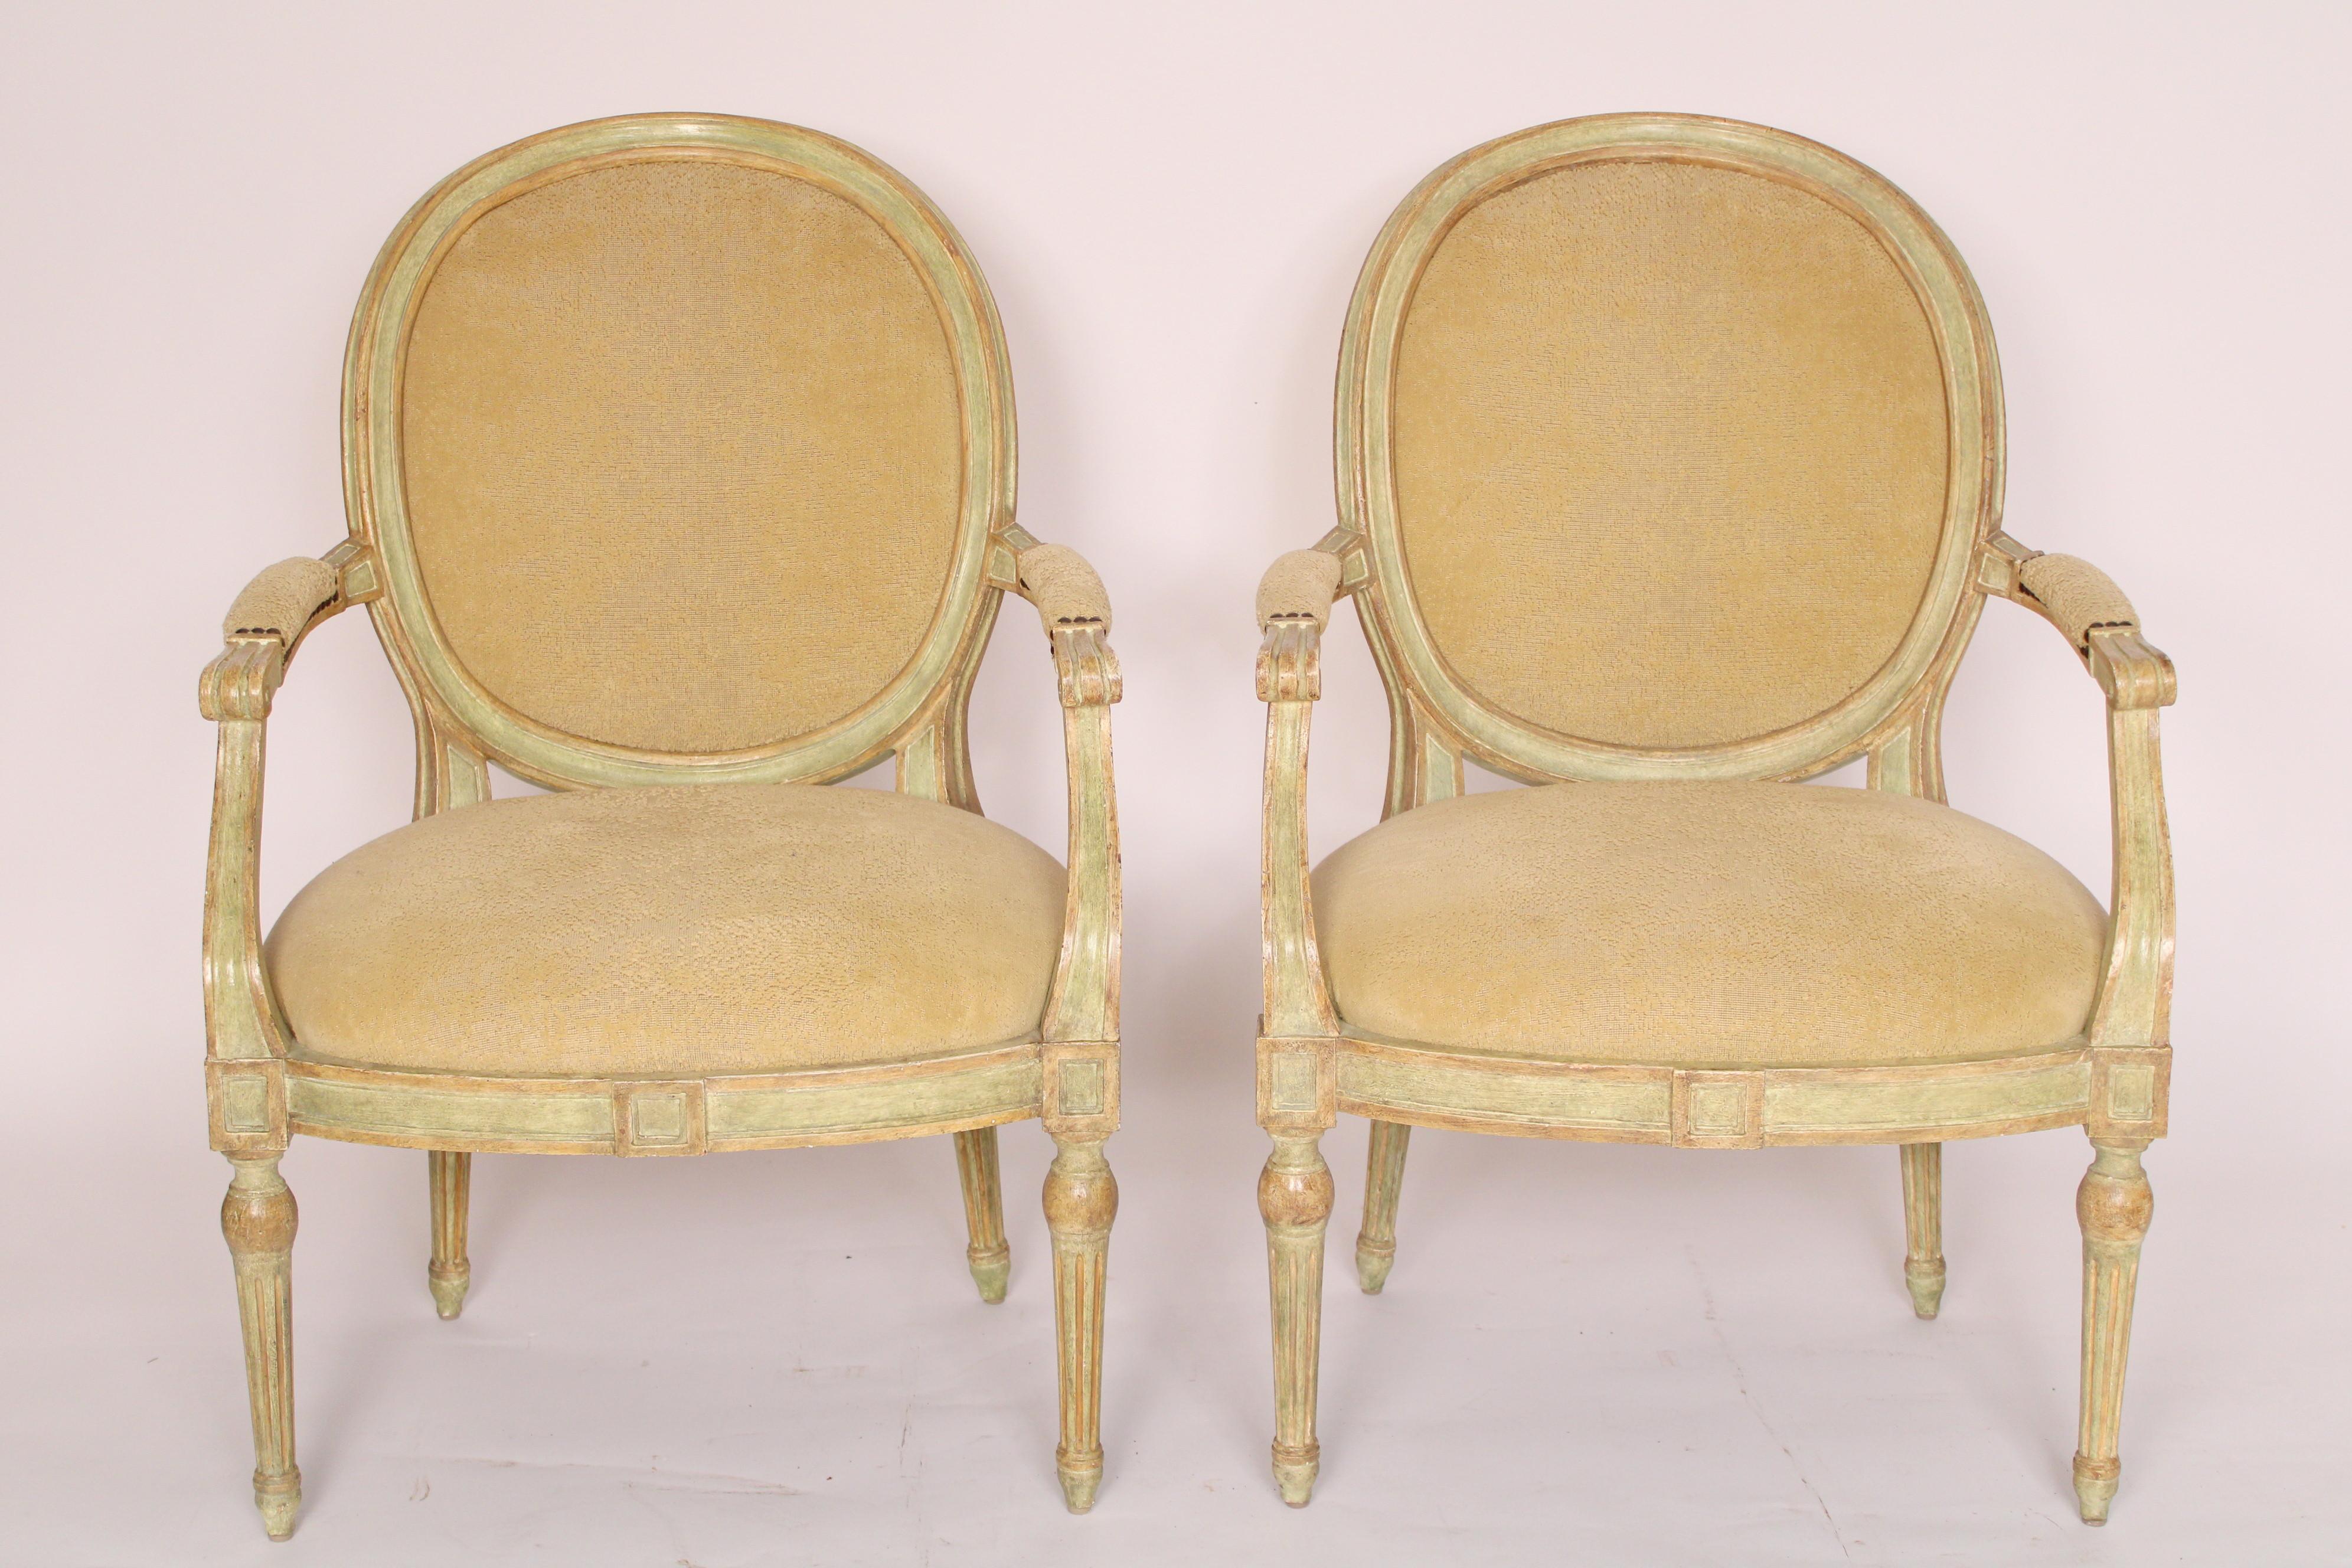 Pair of Italian neoclassical style green painted armchairs, made by Dennis and Leen, circa early 21st century. The back side of the backs are upholstered in a very soft leather. The seat dimensions are approximately, 22.5